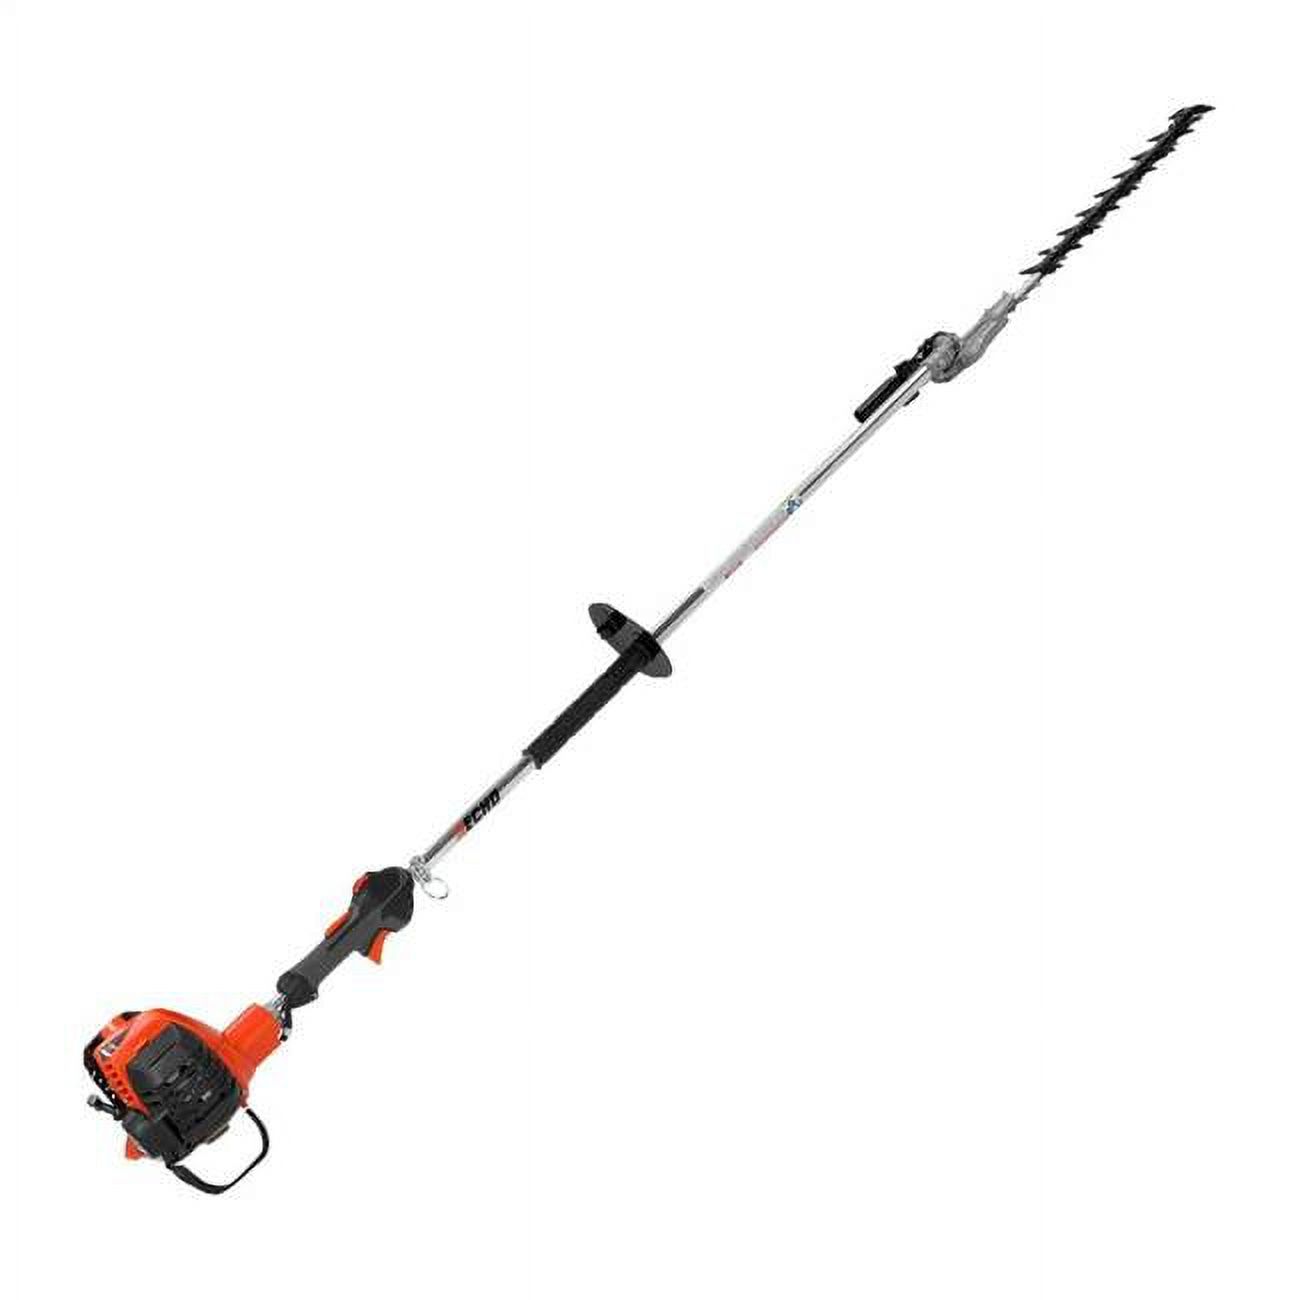 Echo 21 in. 25.4 cc Gas 2-Stroke X Series Hedge Trimmer - HCA-2620 - image 1 of 4